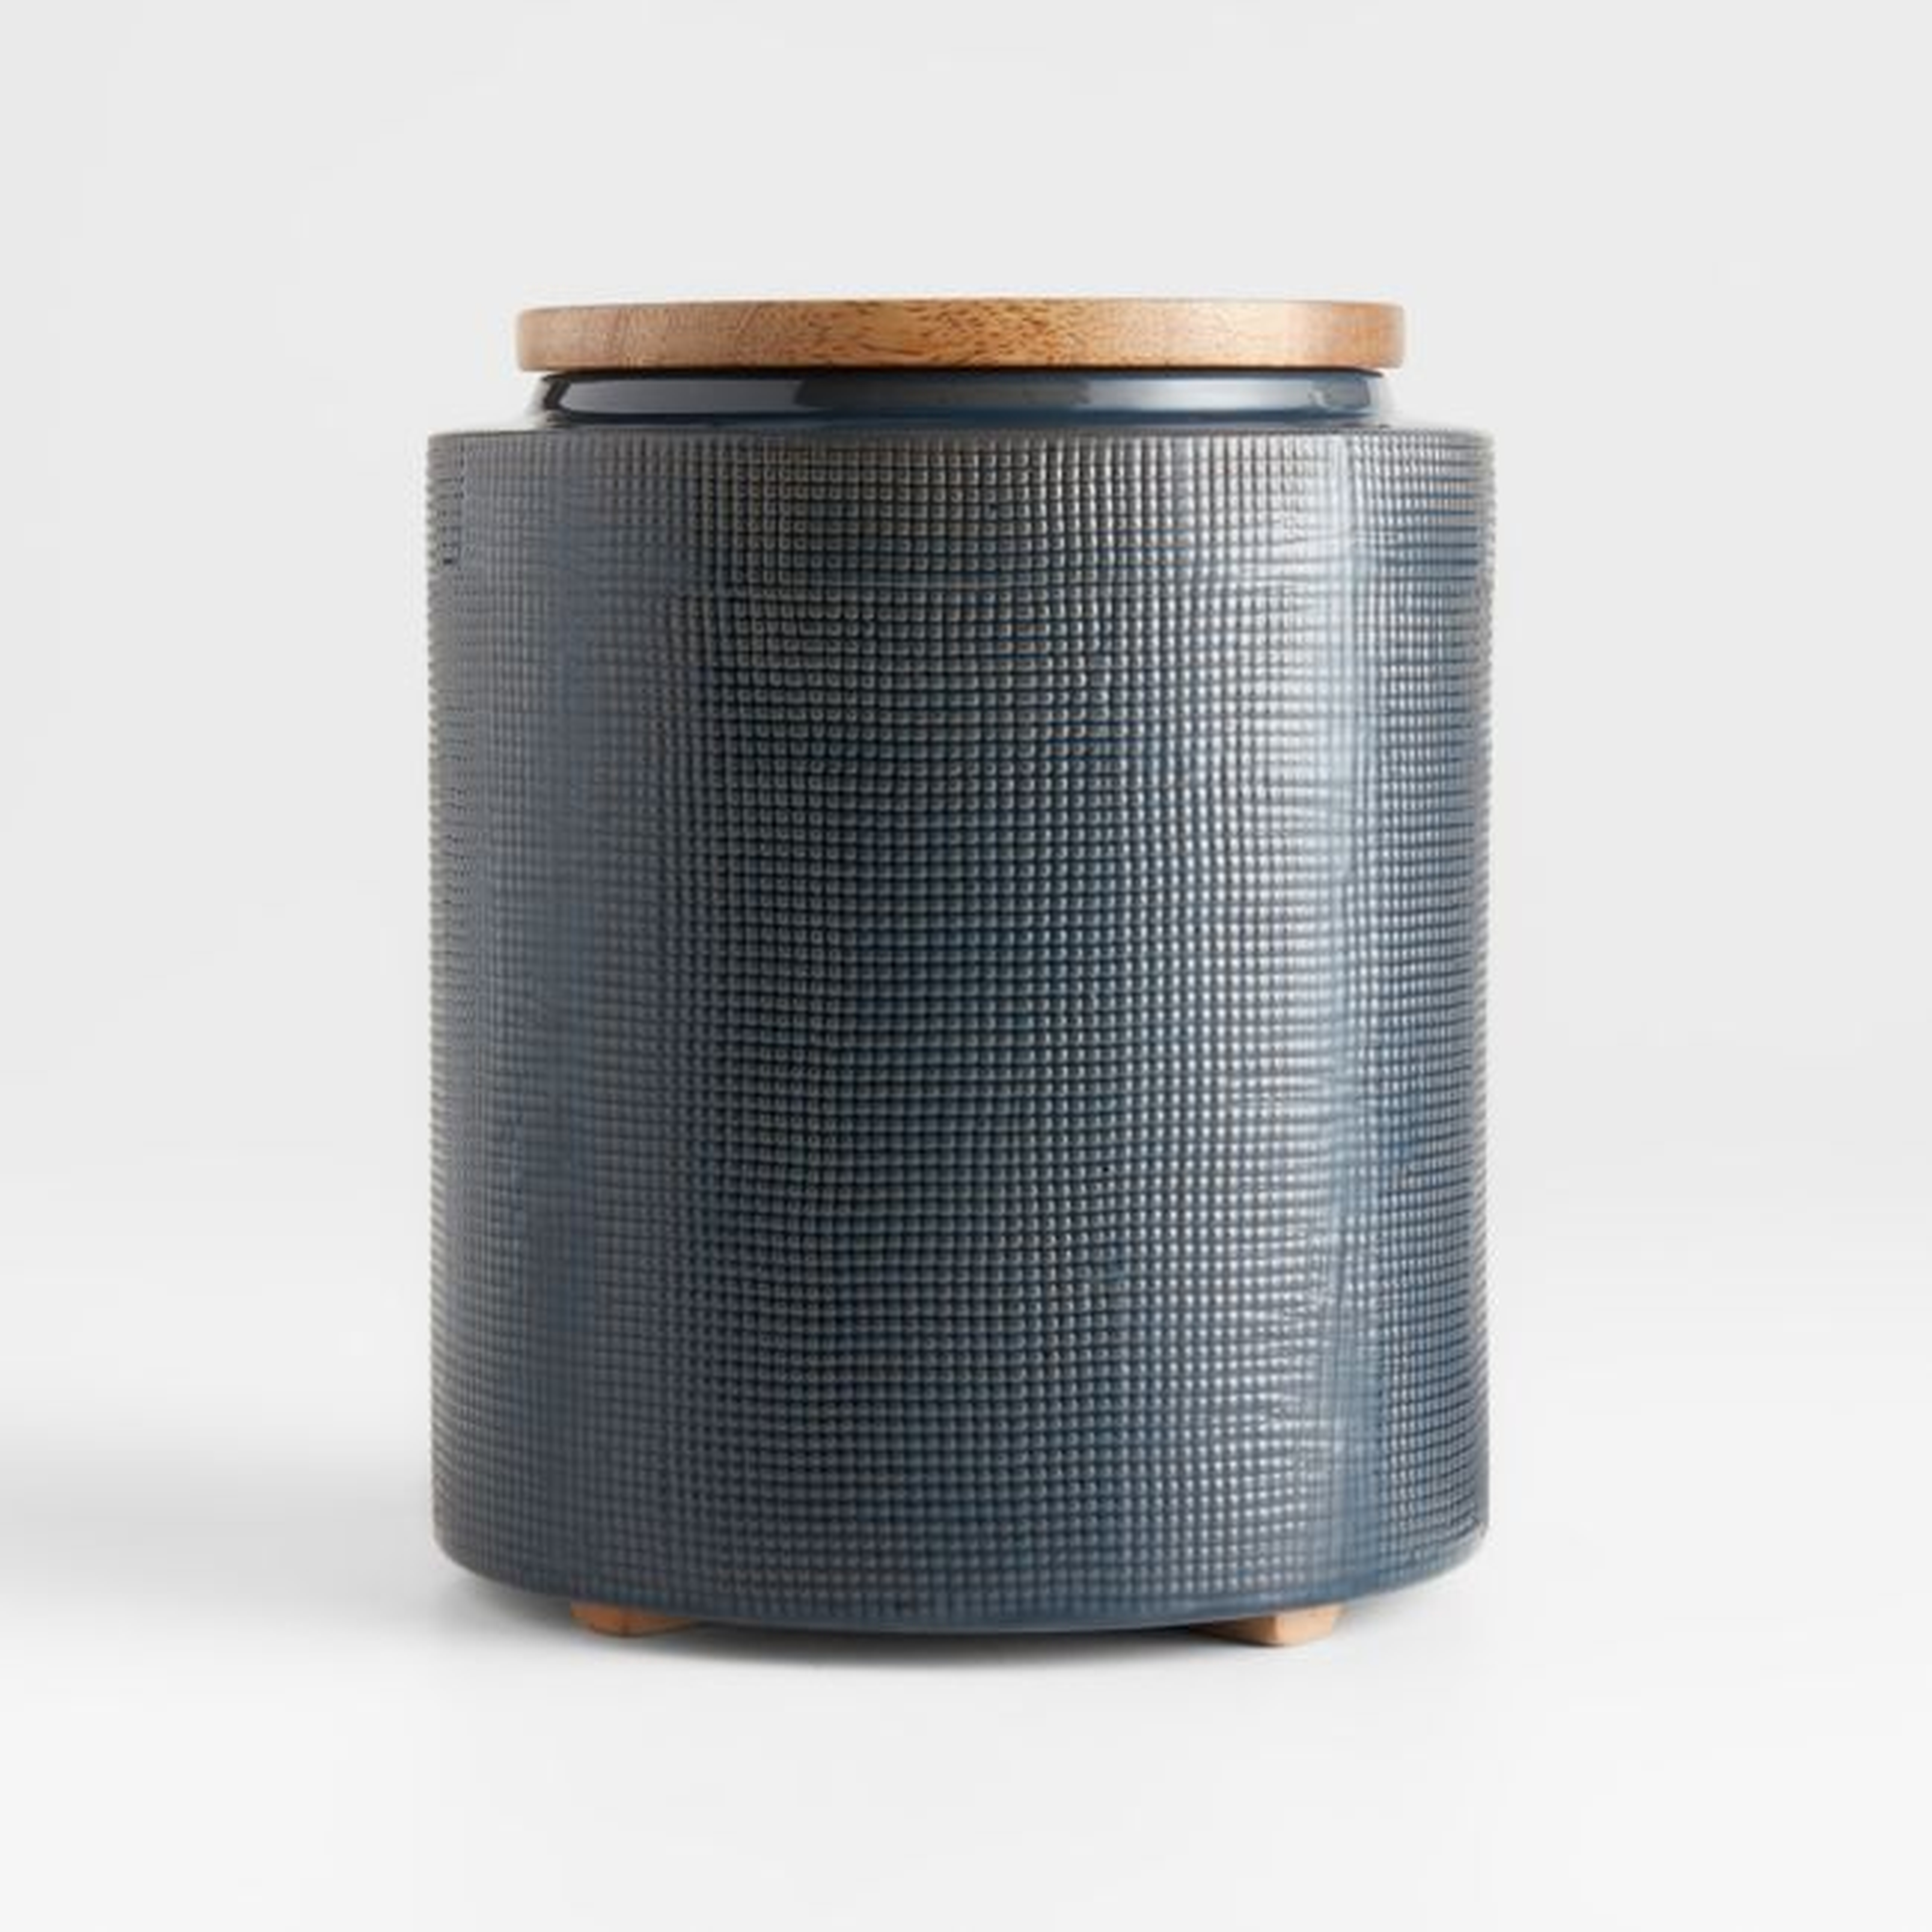 Ena Large Ceramic Canister with Wood Lid - Crate and Barrel